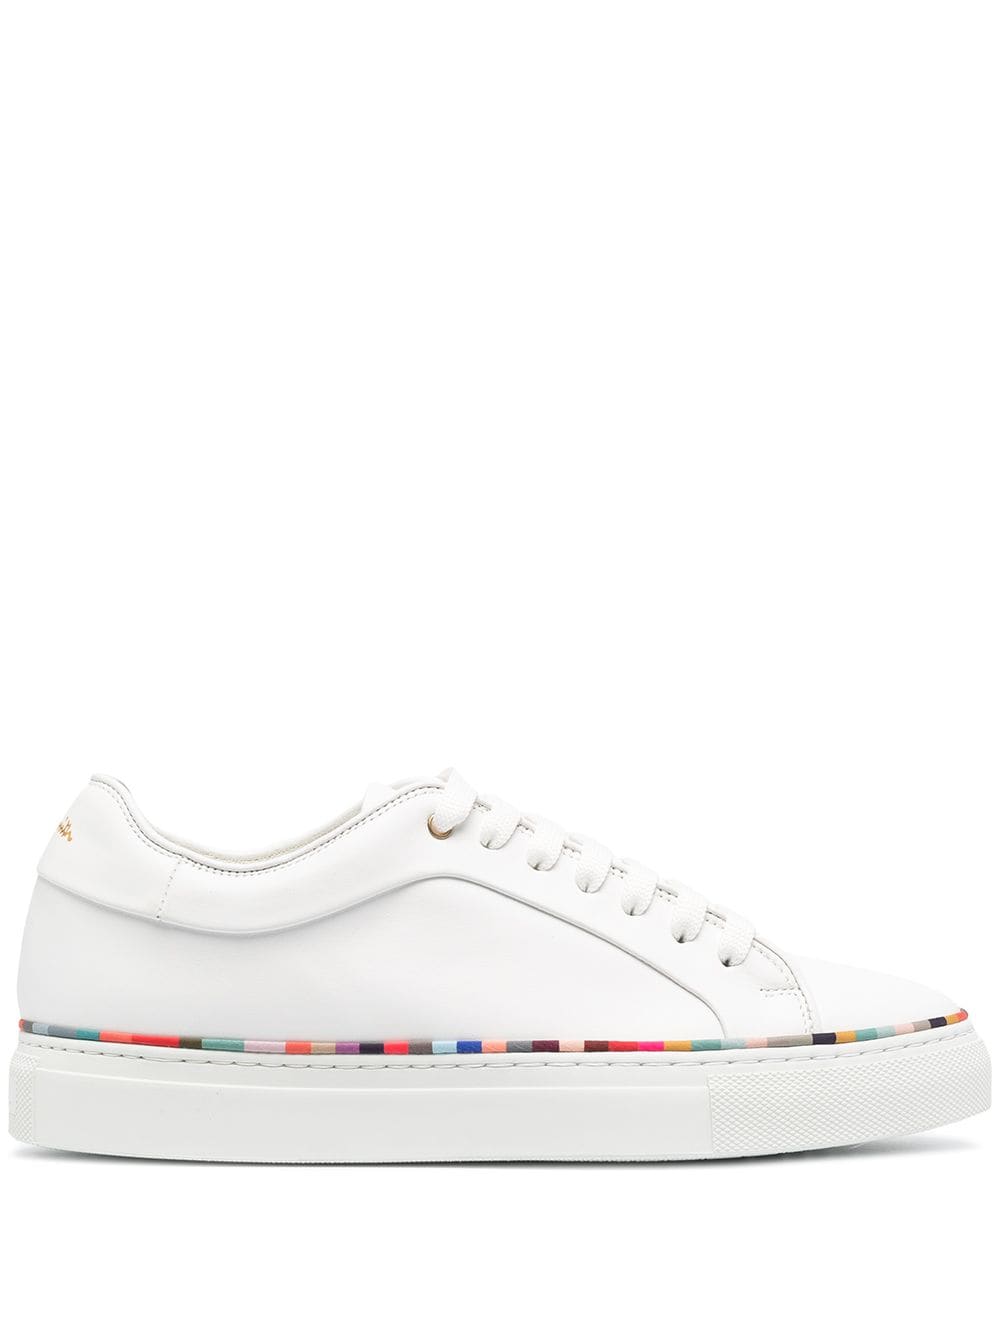 PAUL SMITH LOW-TOP SNEAKERS